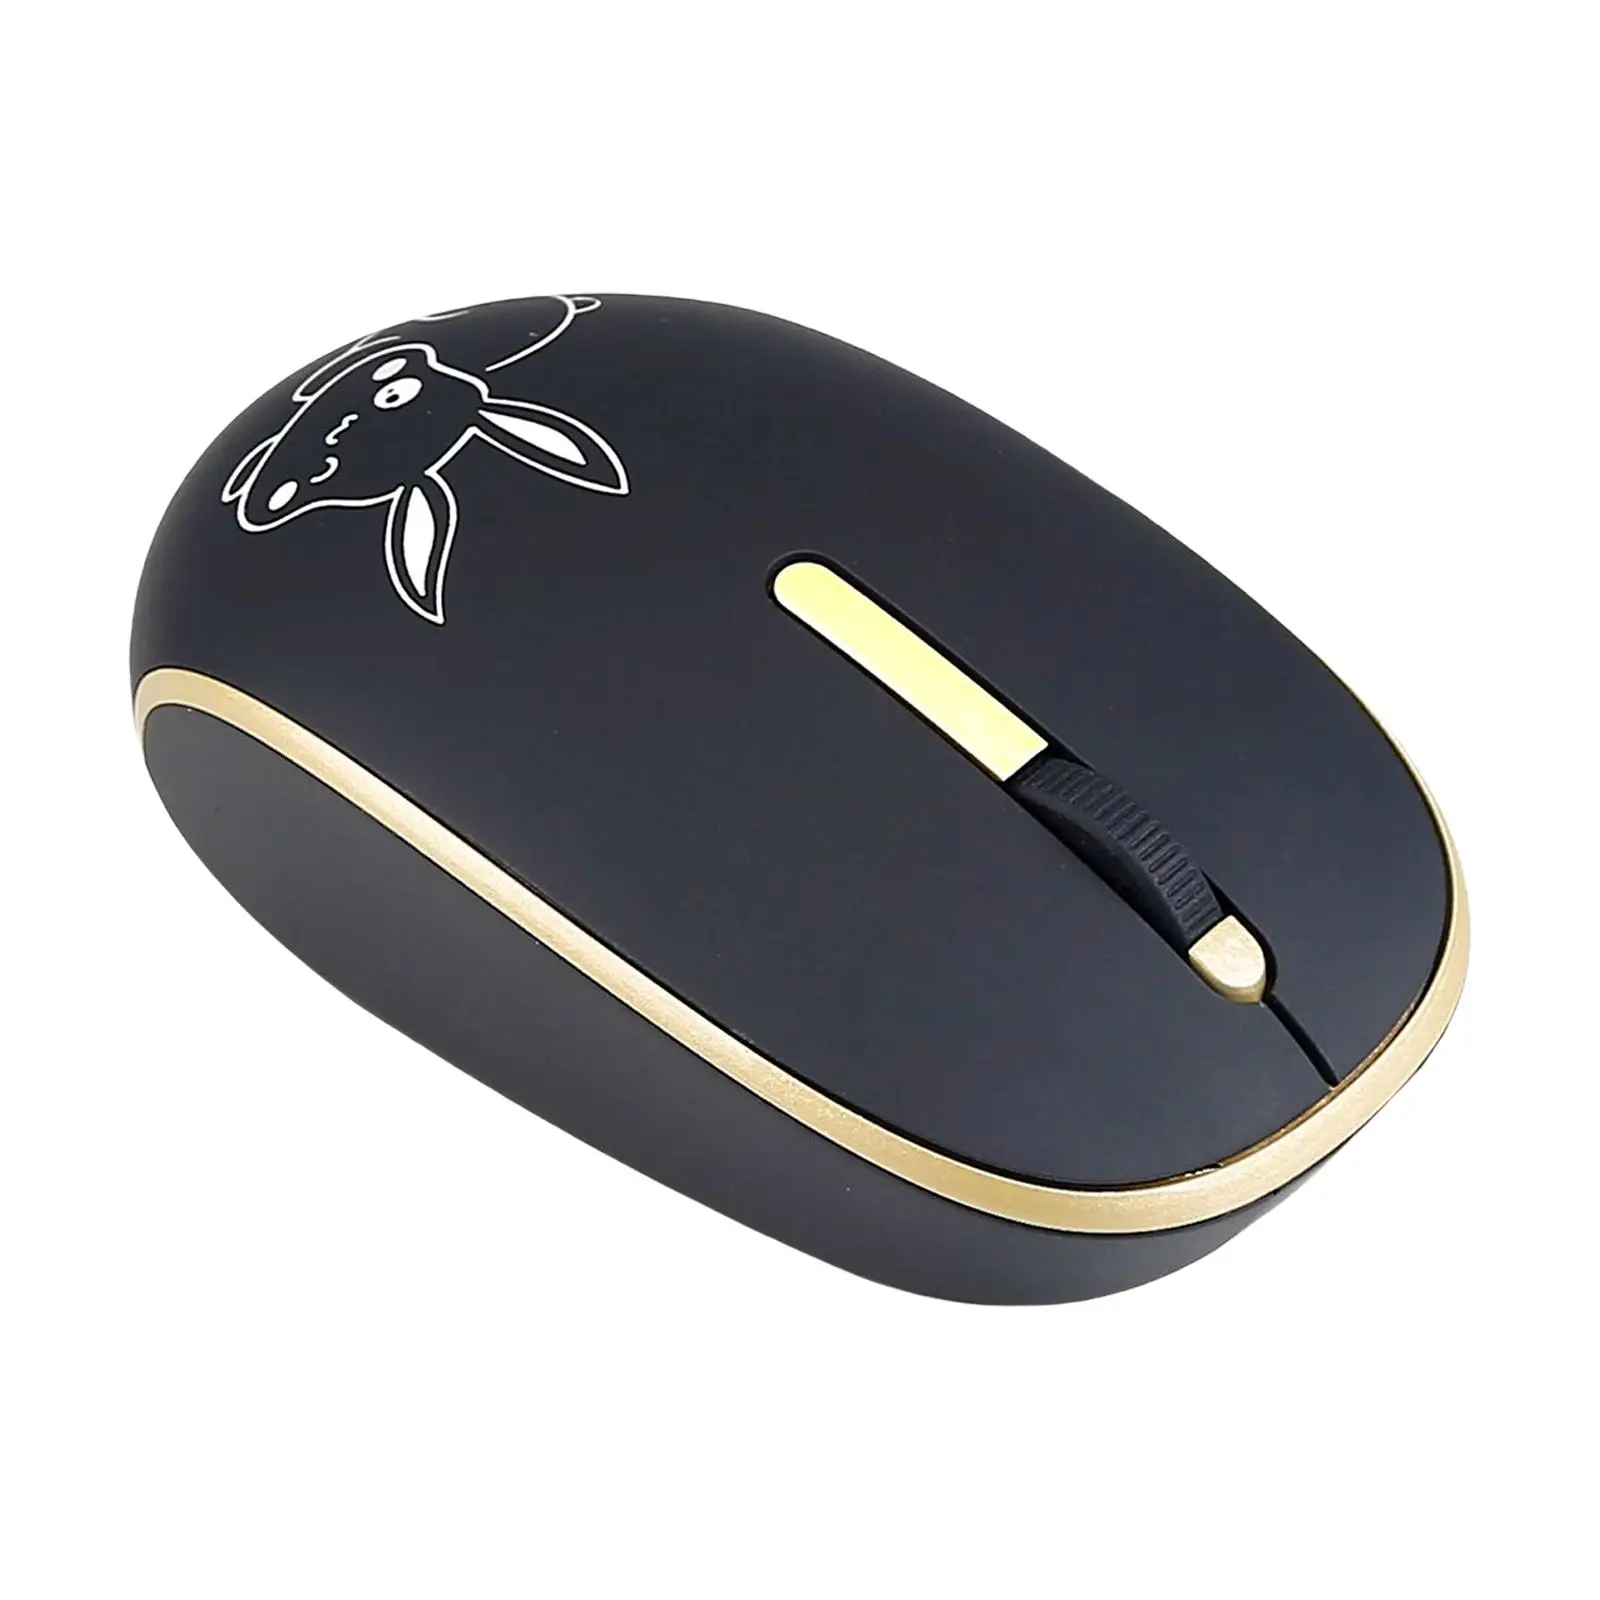 Portable 2.4G Wireless Mouse usb and Type C dual modes Silent Clicking for Tablet Notebook Laptop Computer Desktop